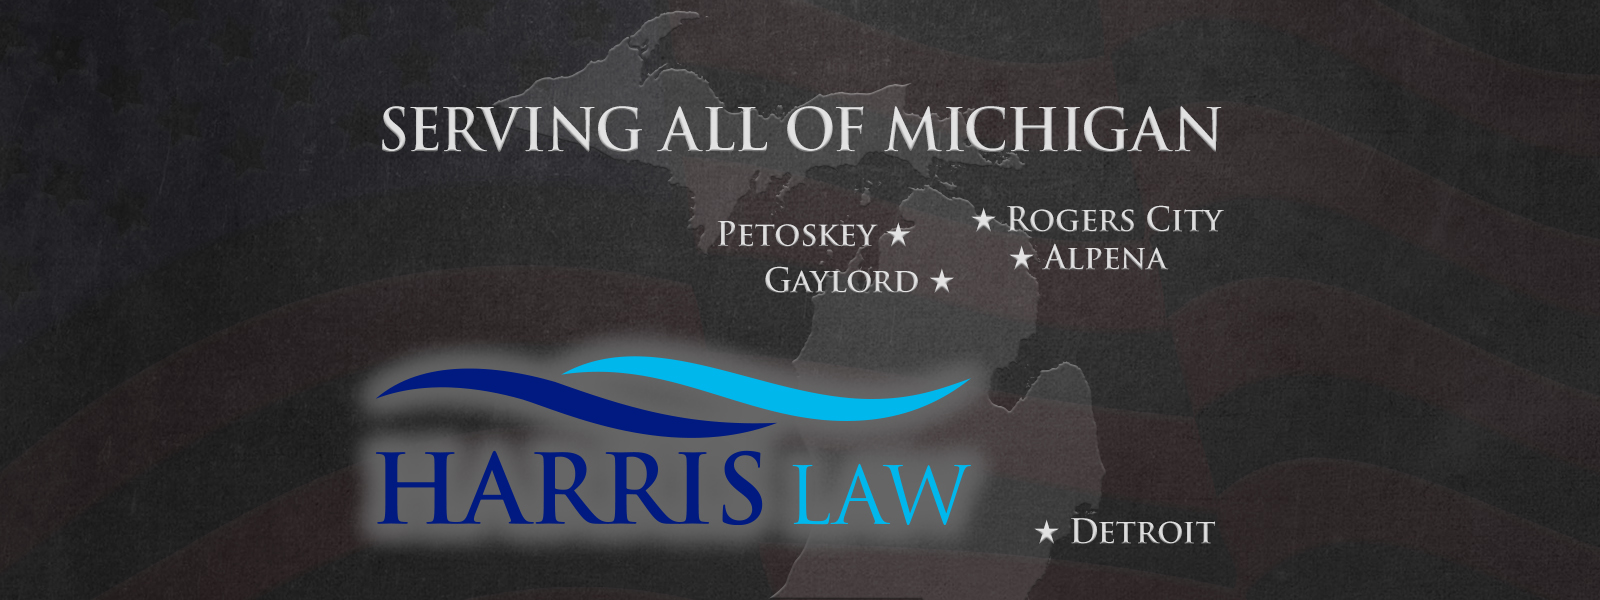 Harris Law with Offices in Petoskey, Gaylord, Rogers City, Alpena, and Detroit